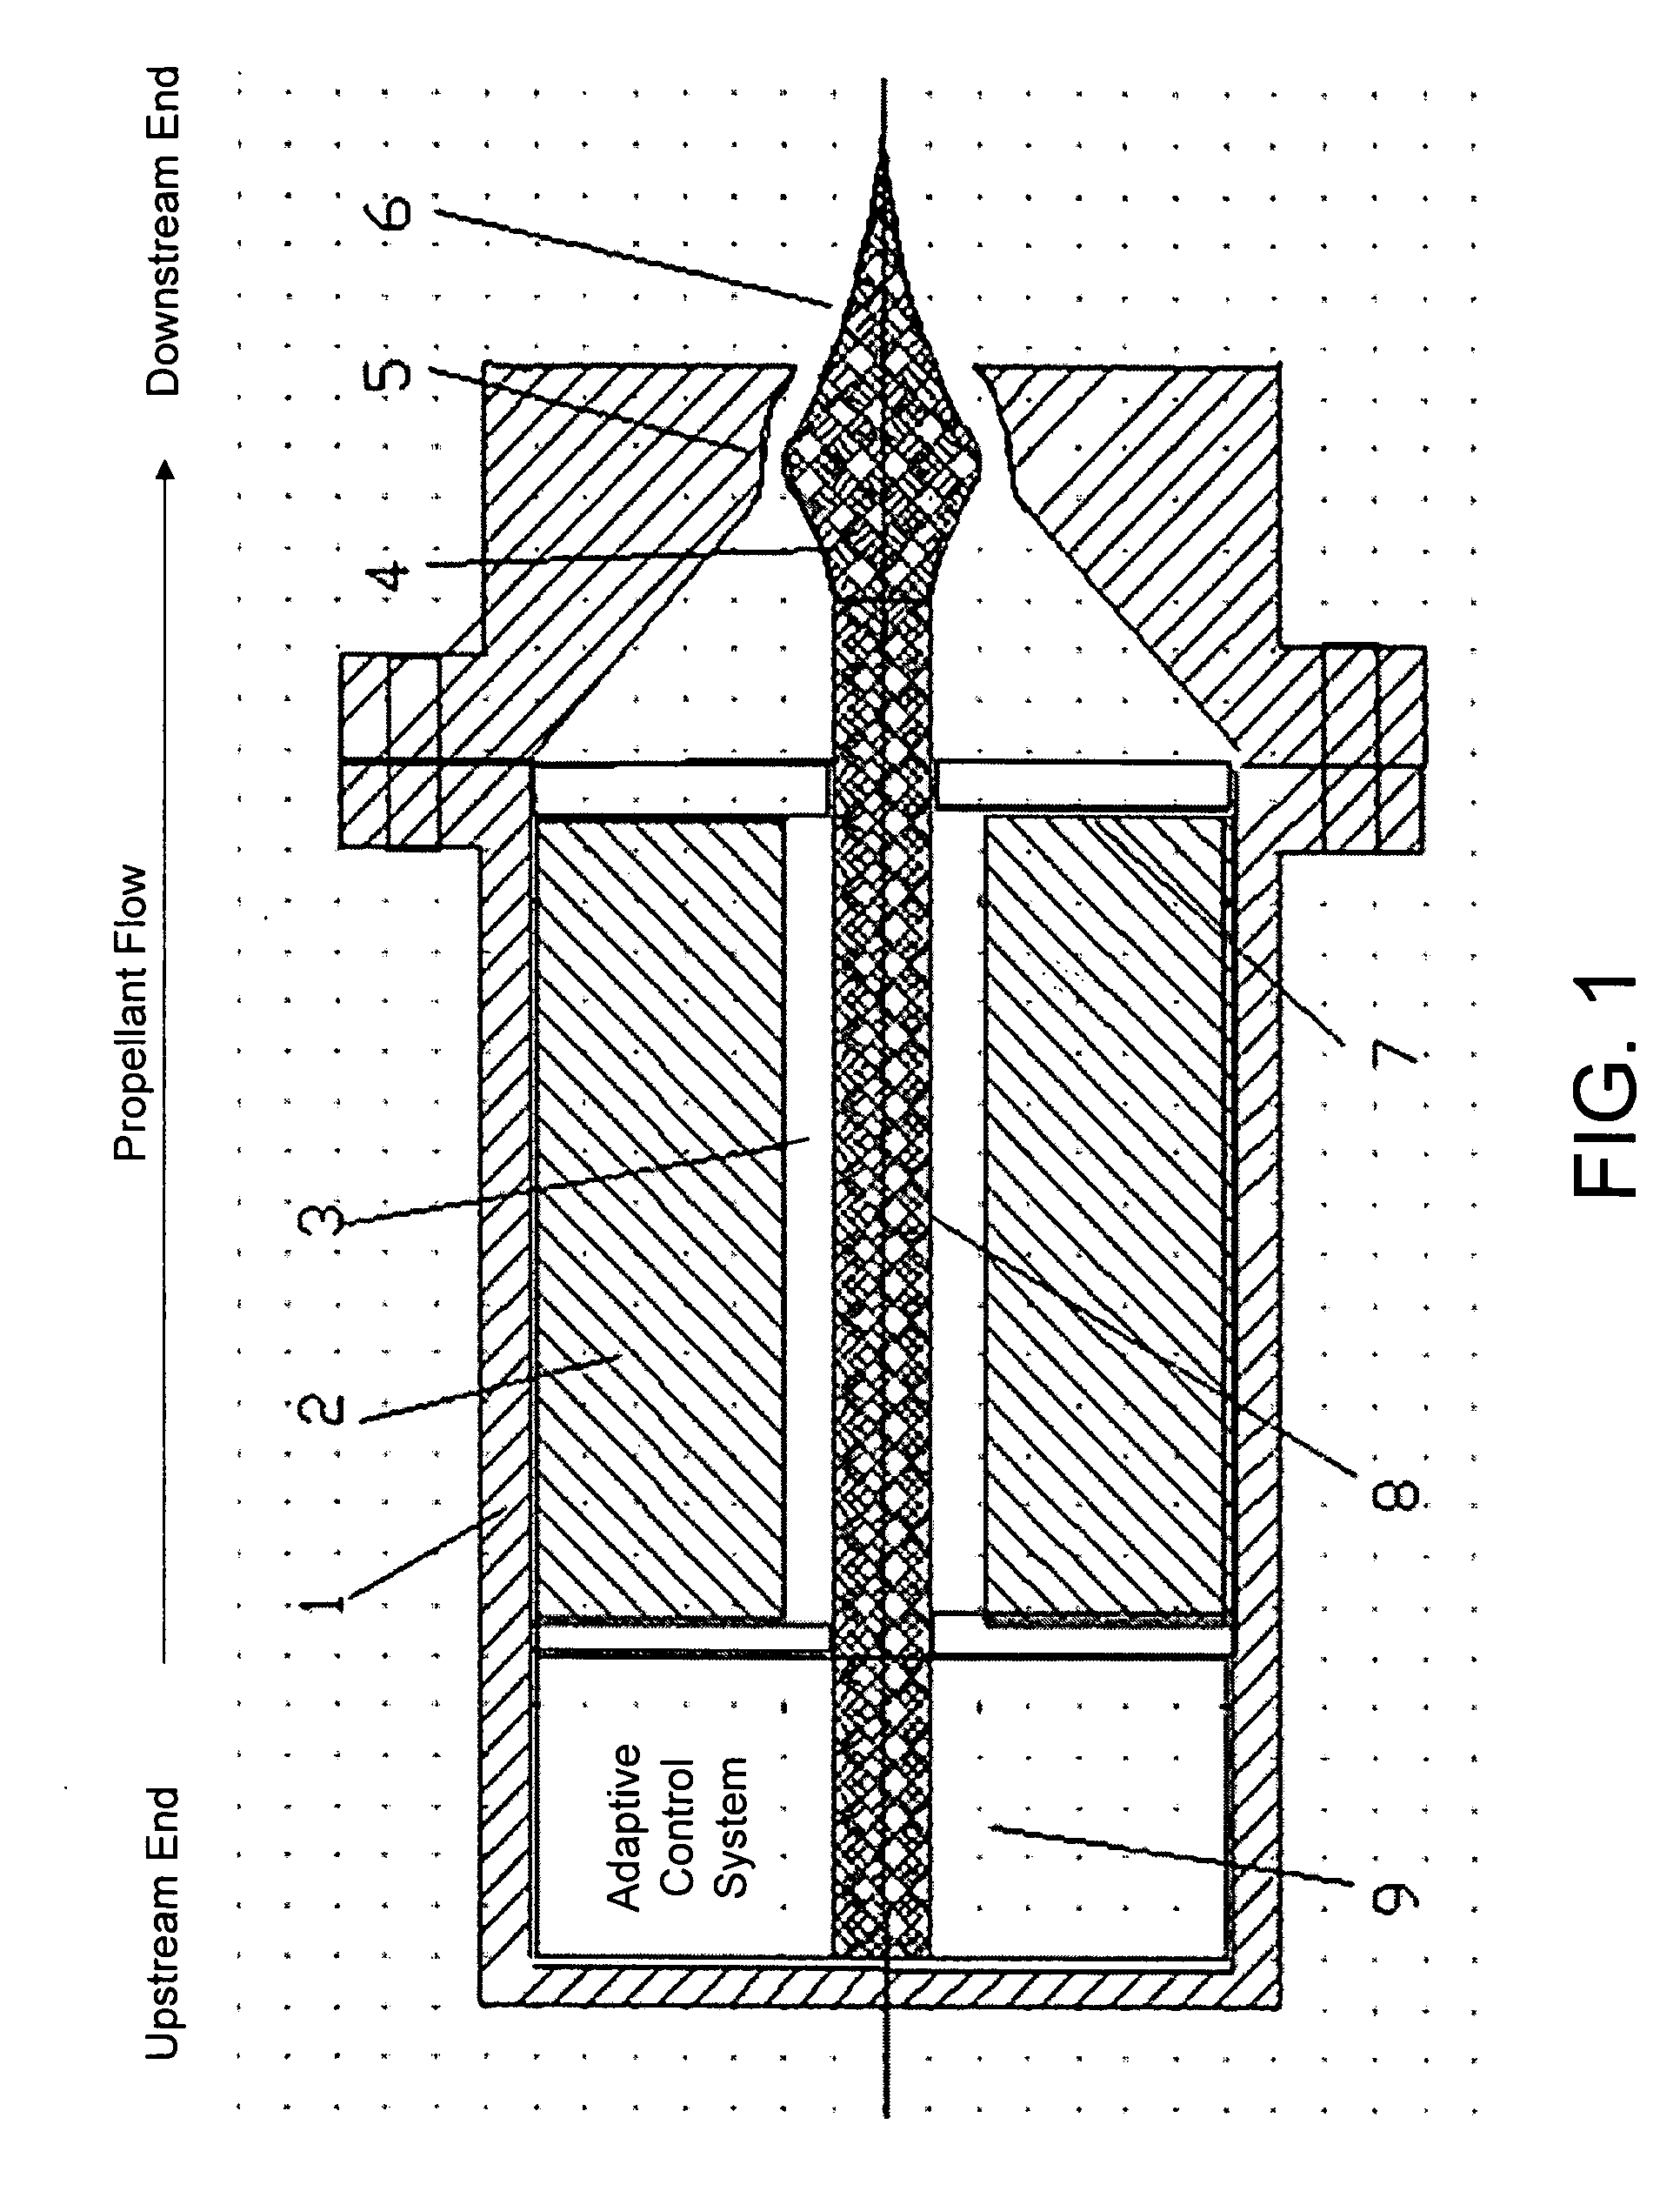 Systems and methods for varying the thrust of rocket motors and engines while maintaining higher efficiency using moveable plug nozzles